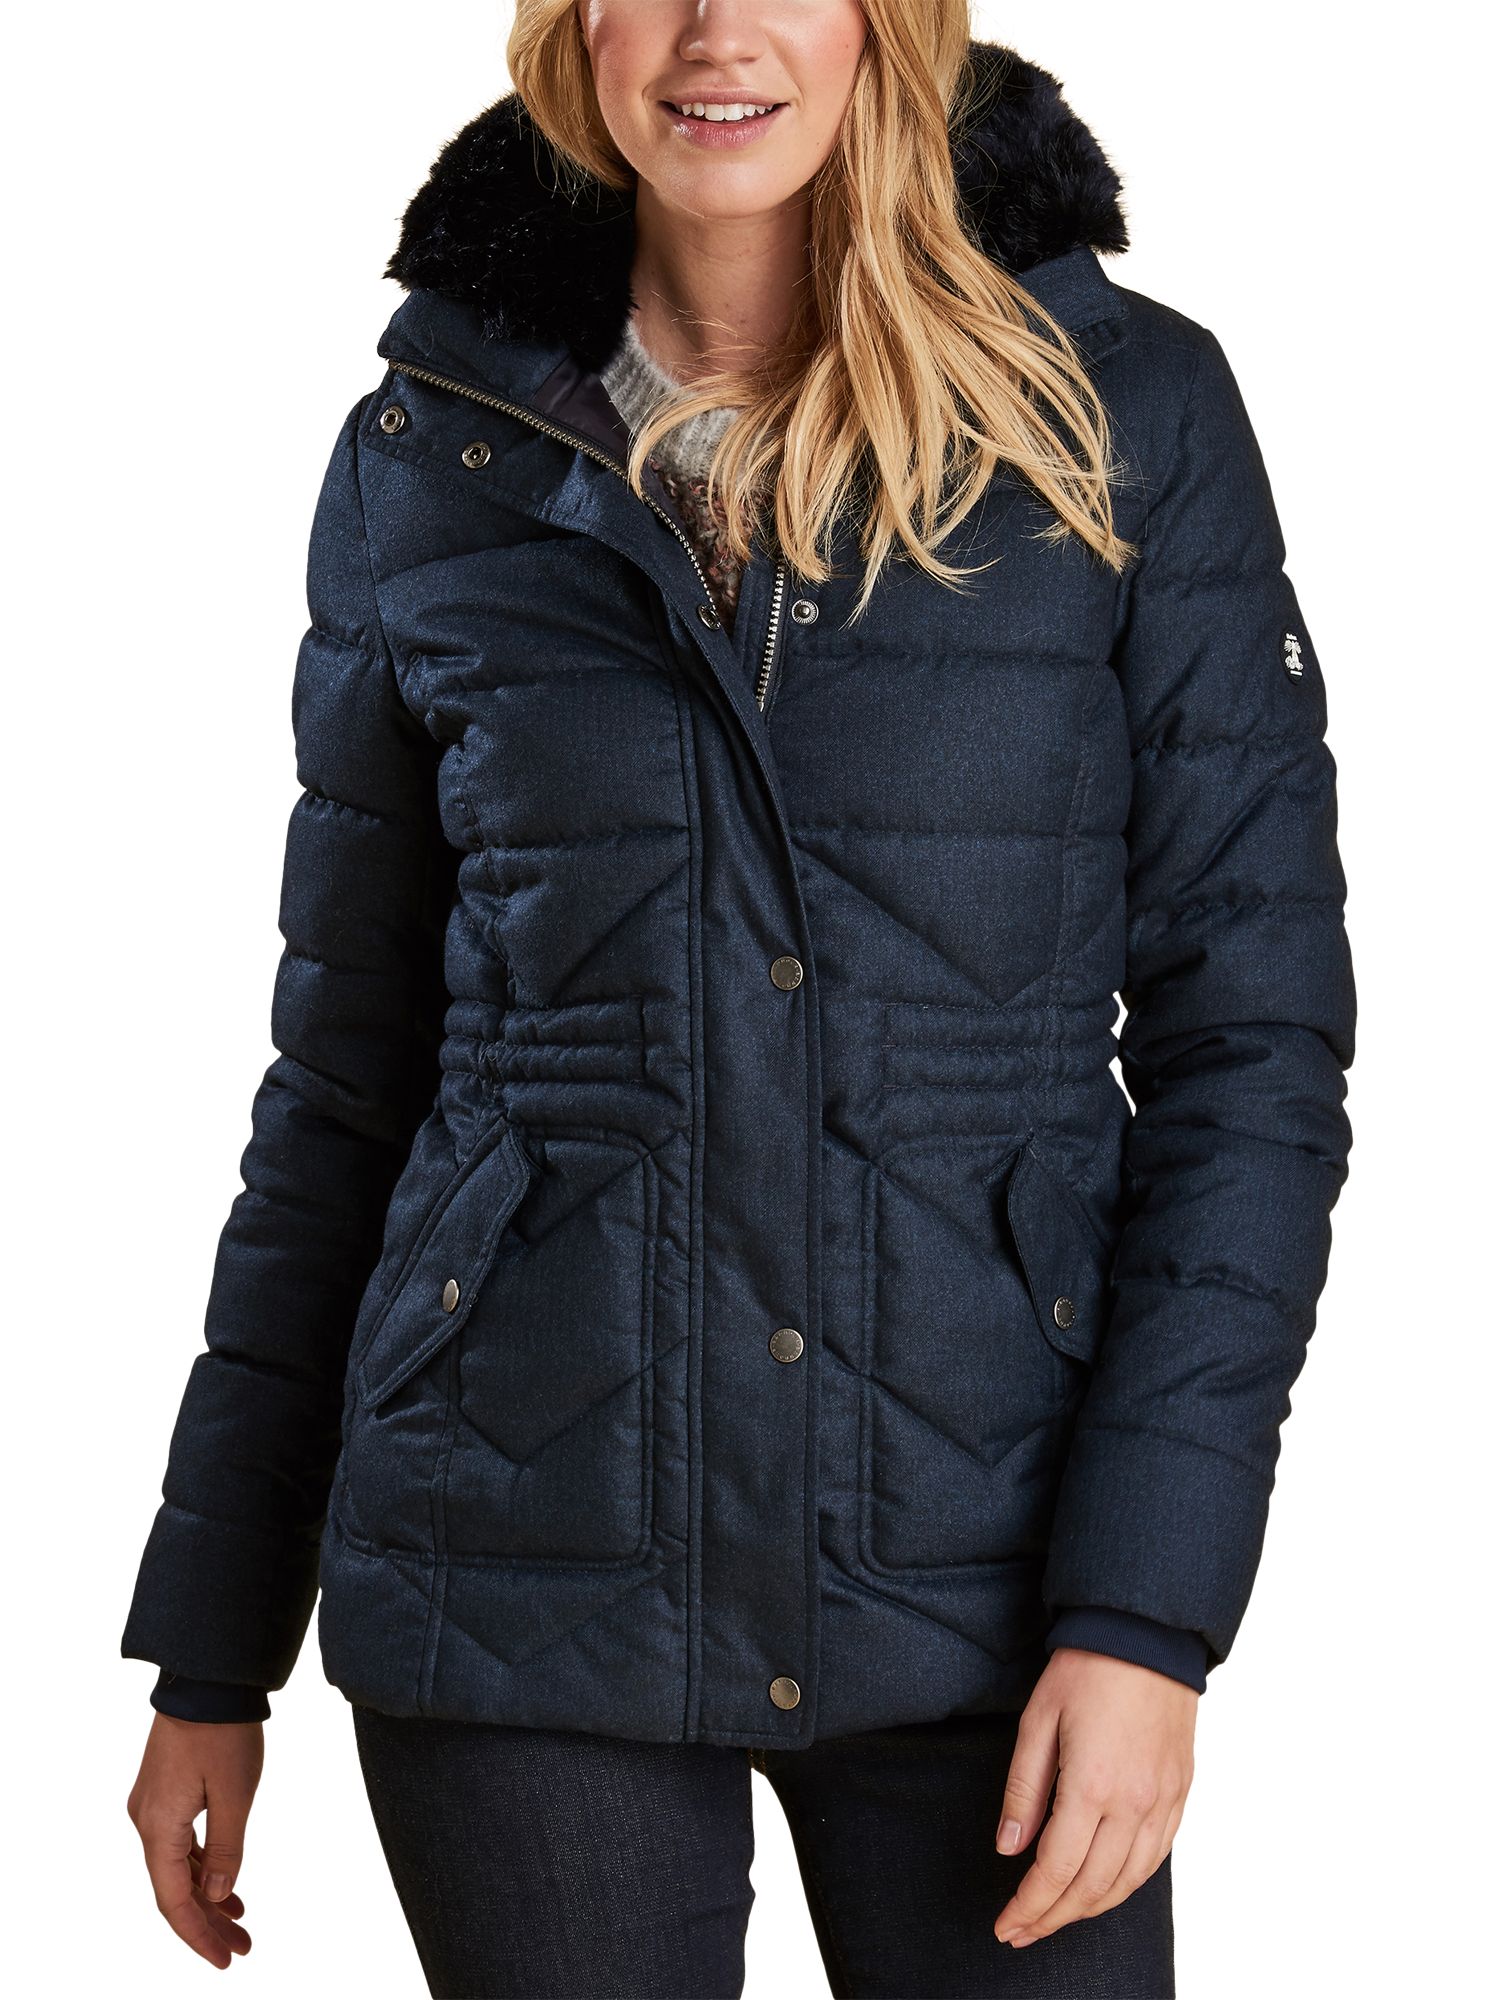 womens cream barbour quilted jacket